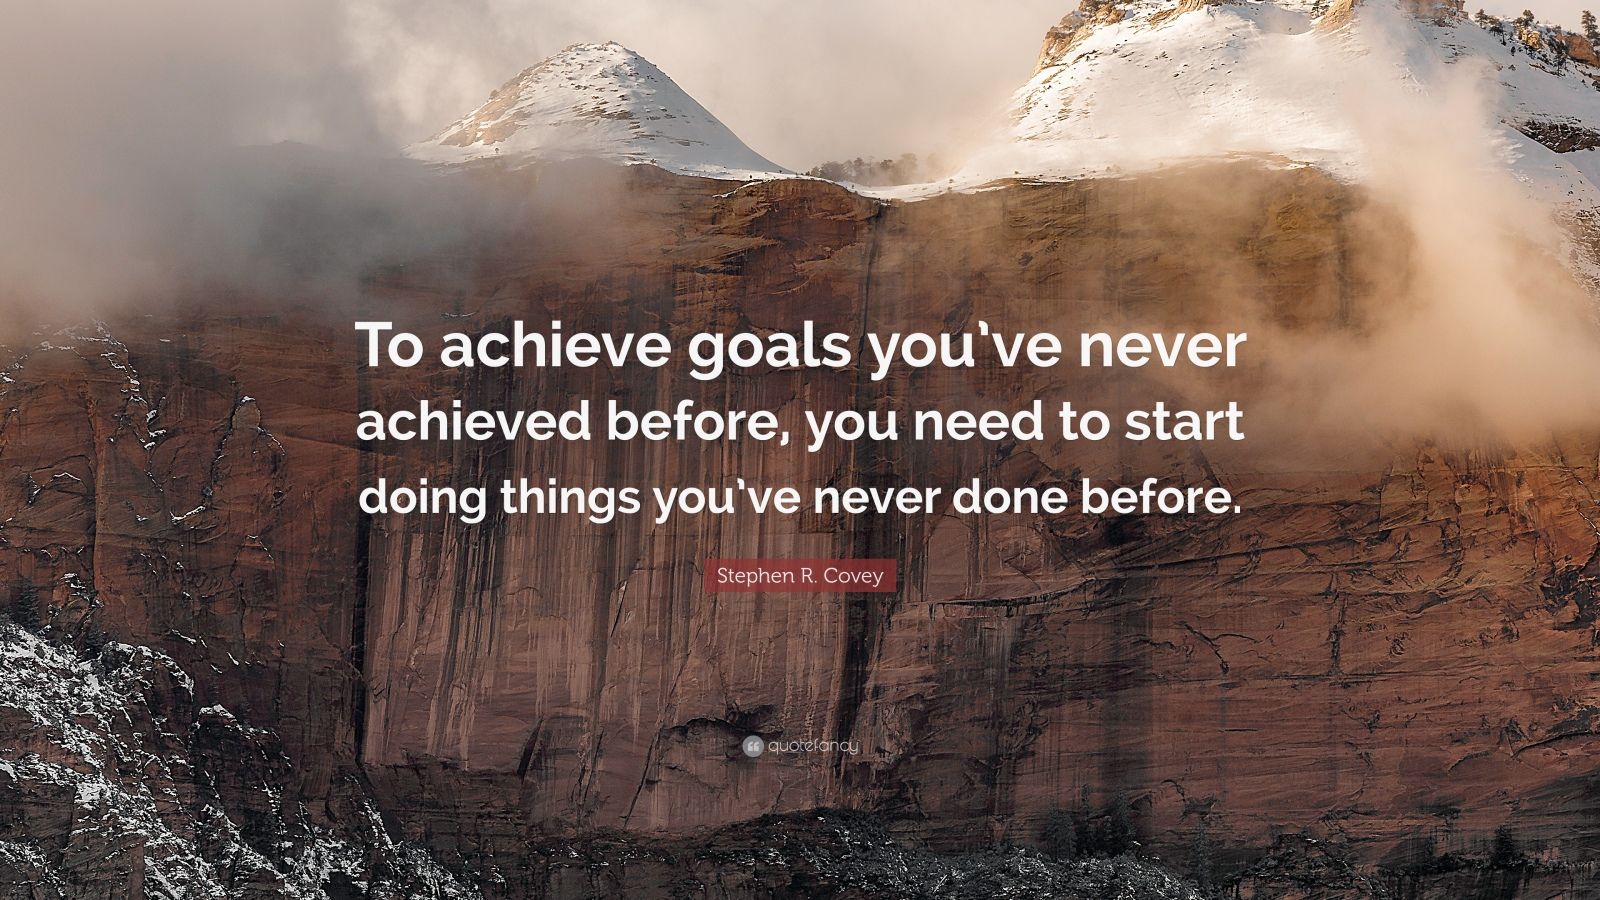 Stephen R. Covey Quote: “To achieve goals you’ve never achieved before